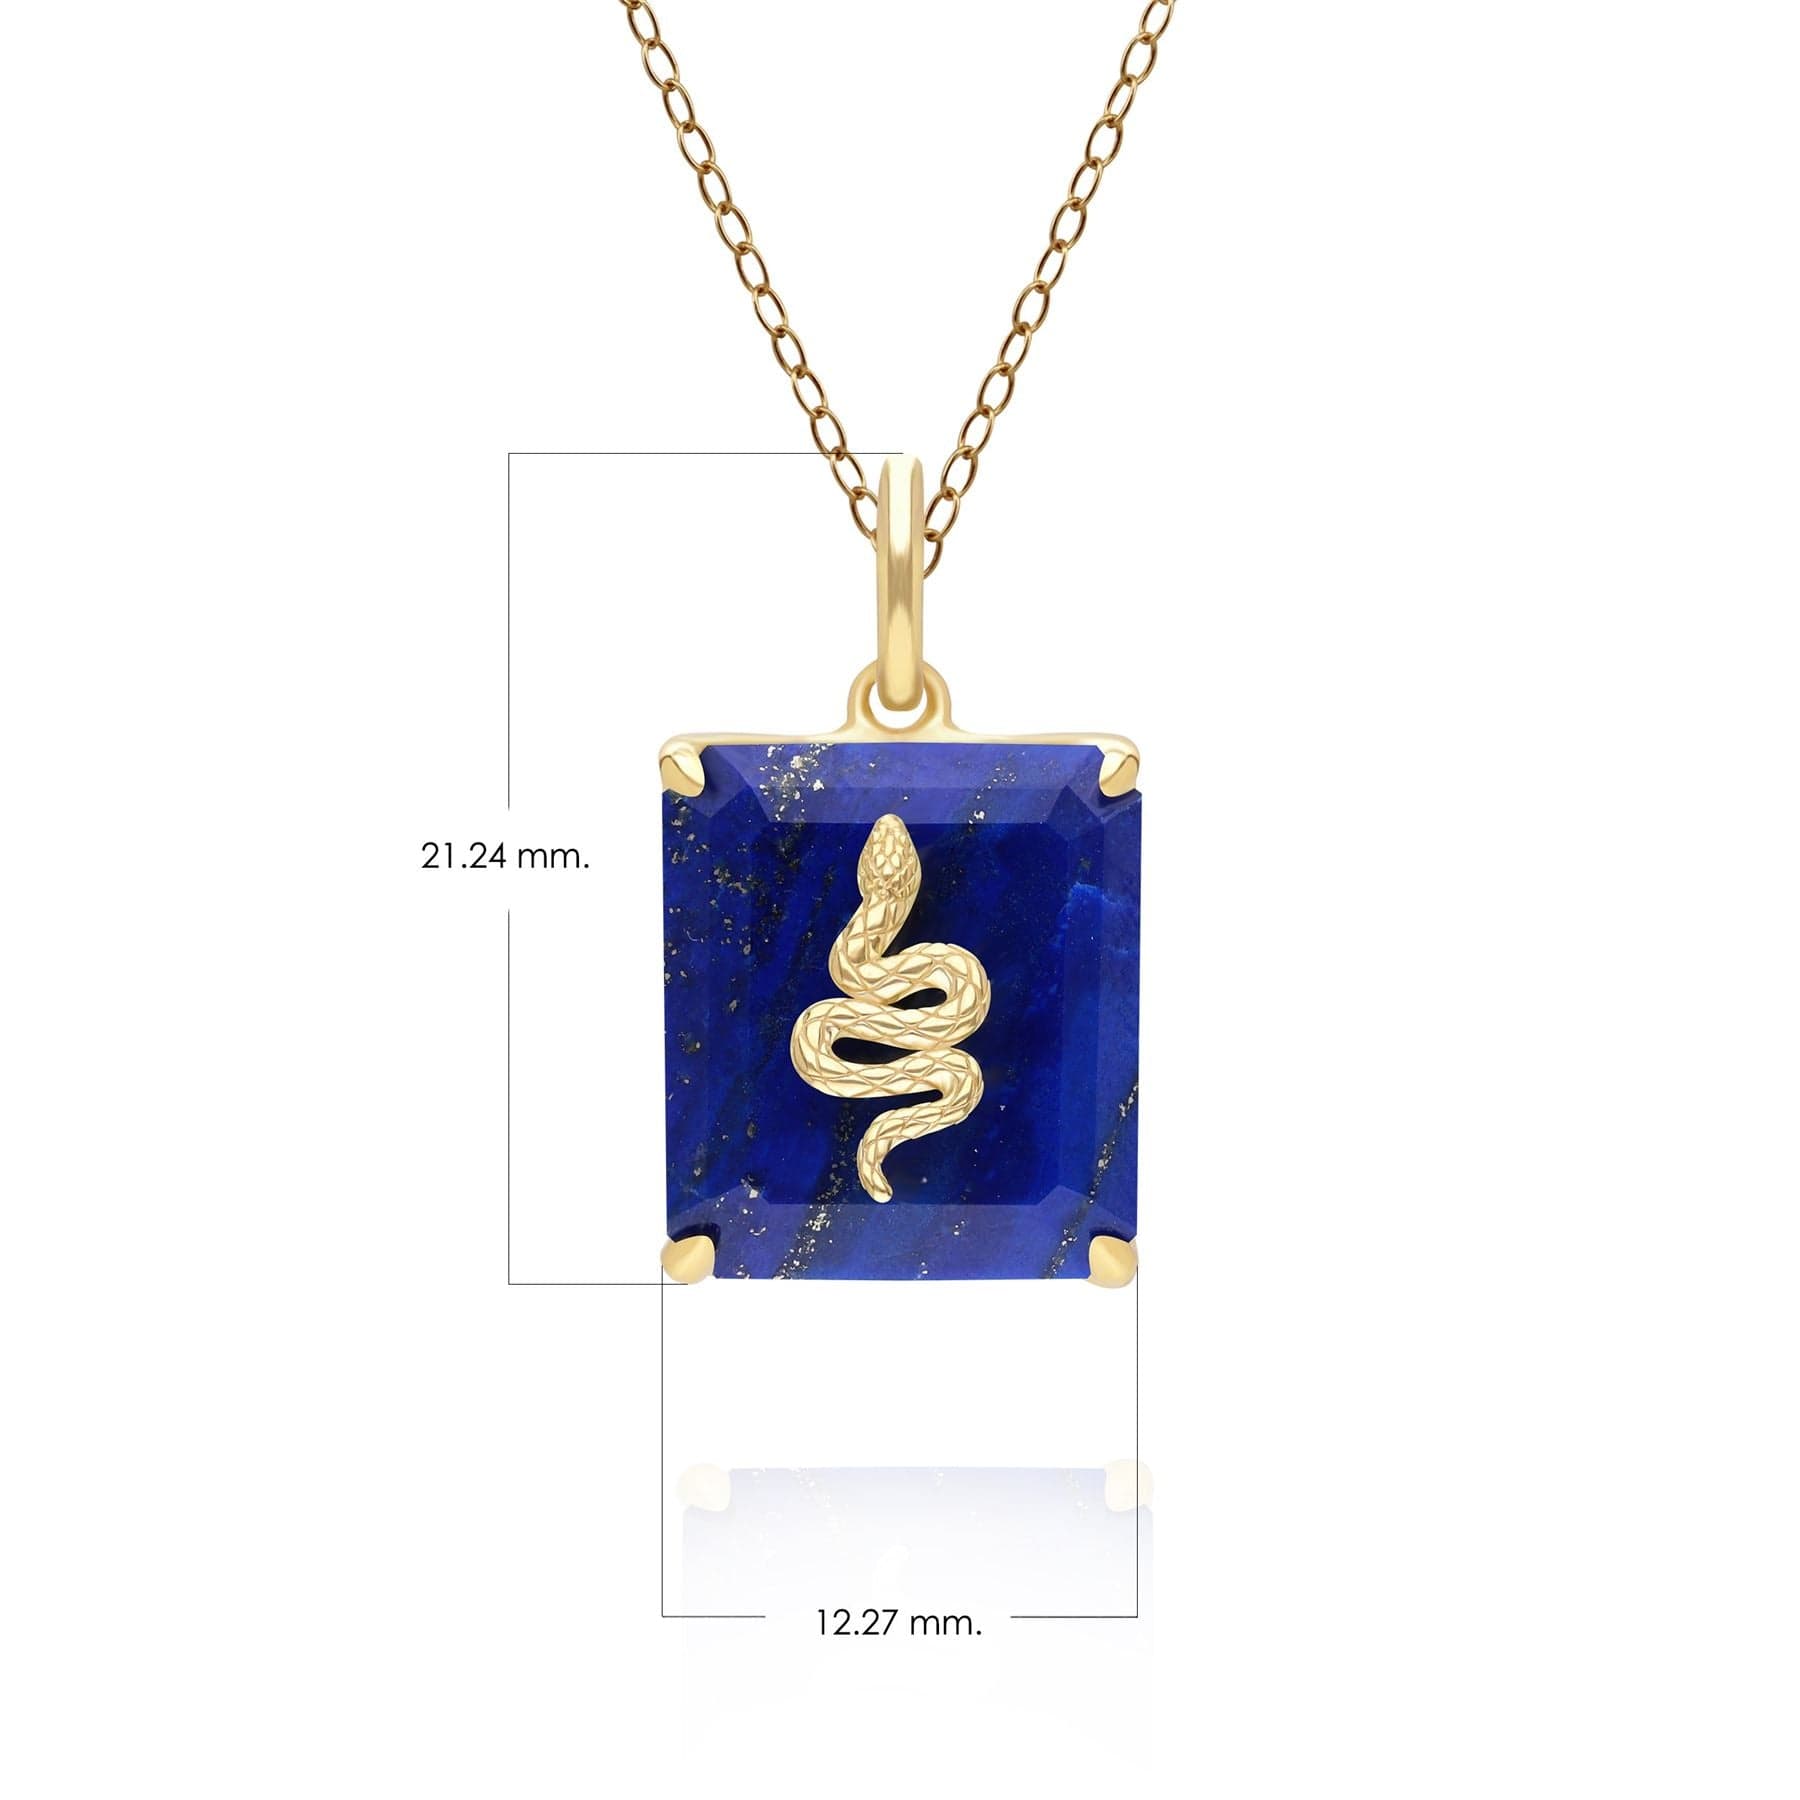 Grand Deco Lapis Lazuli Snake Pendant in Gold Plated Sterling Silver - Gemondo